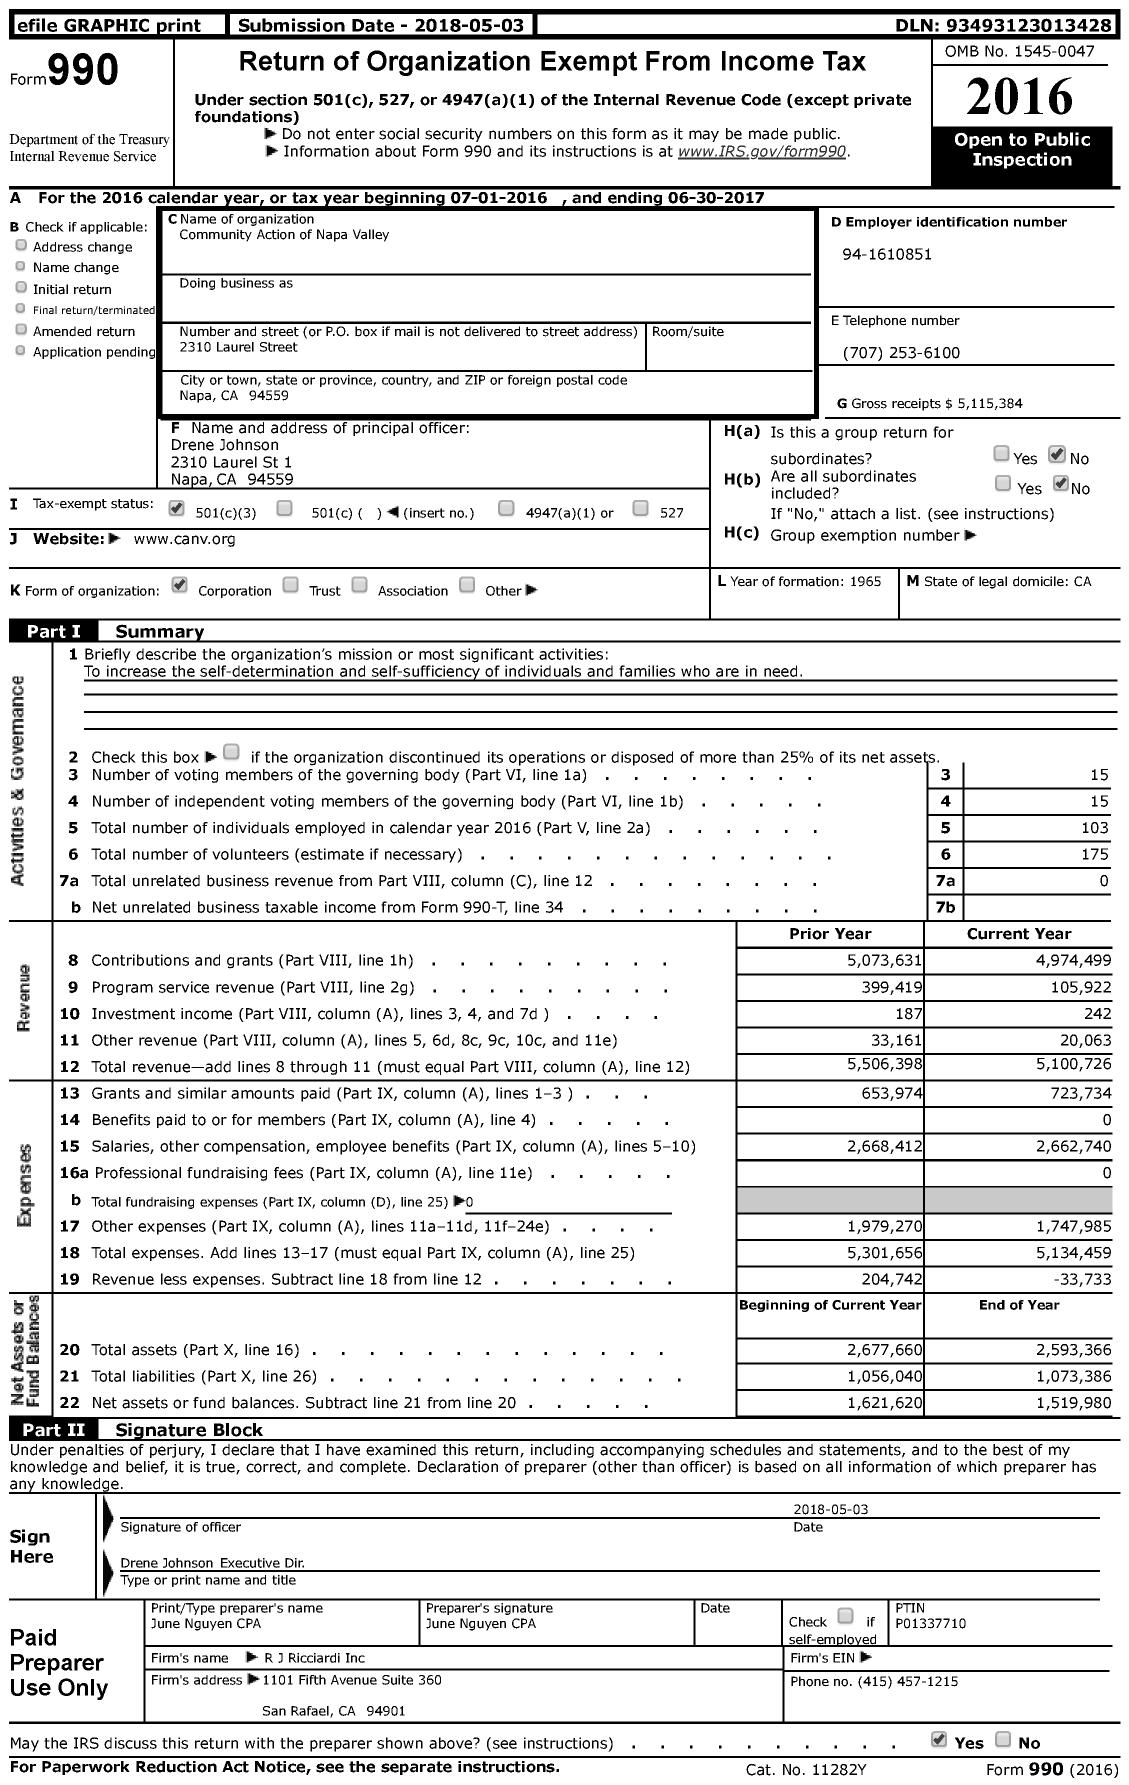 Image of first page of 2016 Form 990 for Community Action of Napa Valley (CANV)